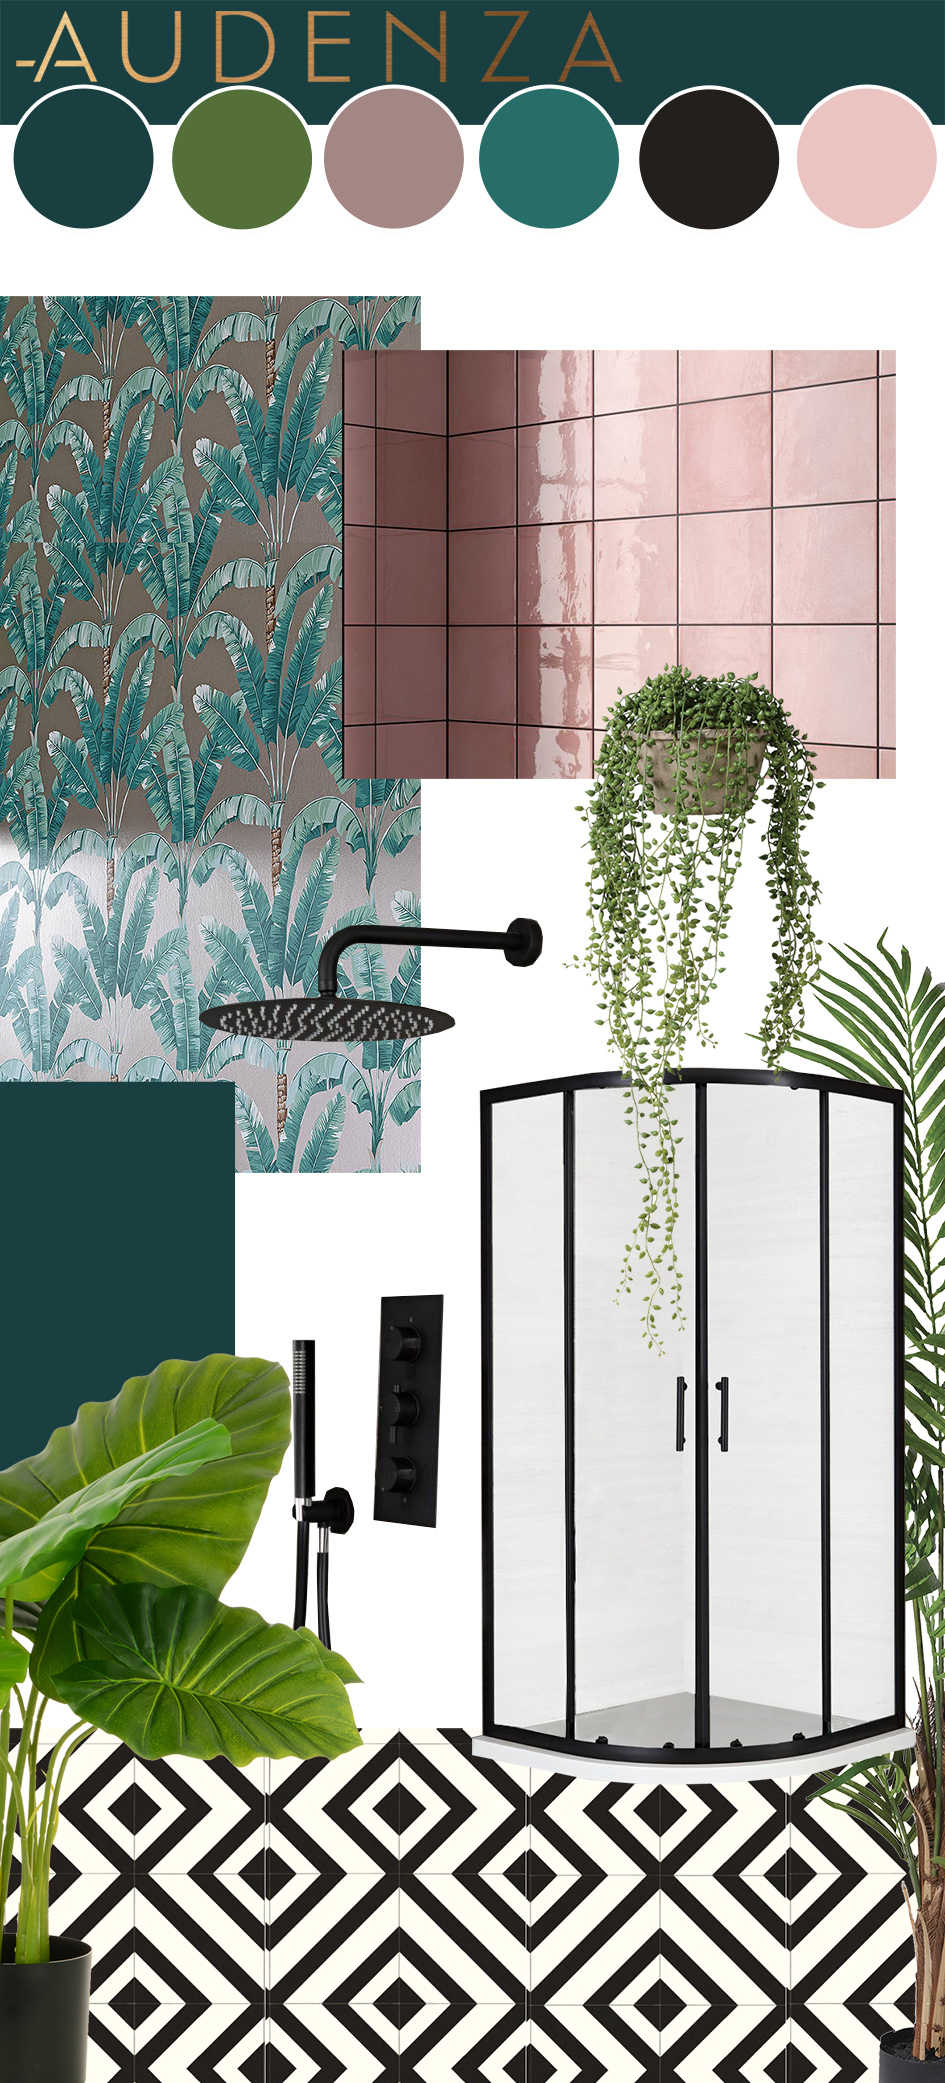 Pink & teal tropical bathroom inspiration - with monochrome vinyl flooring, pink tiles, tropical wallpaper and lush house plants.